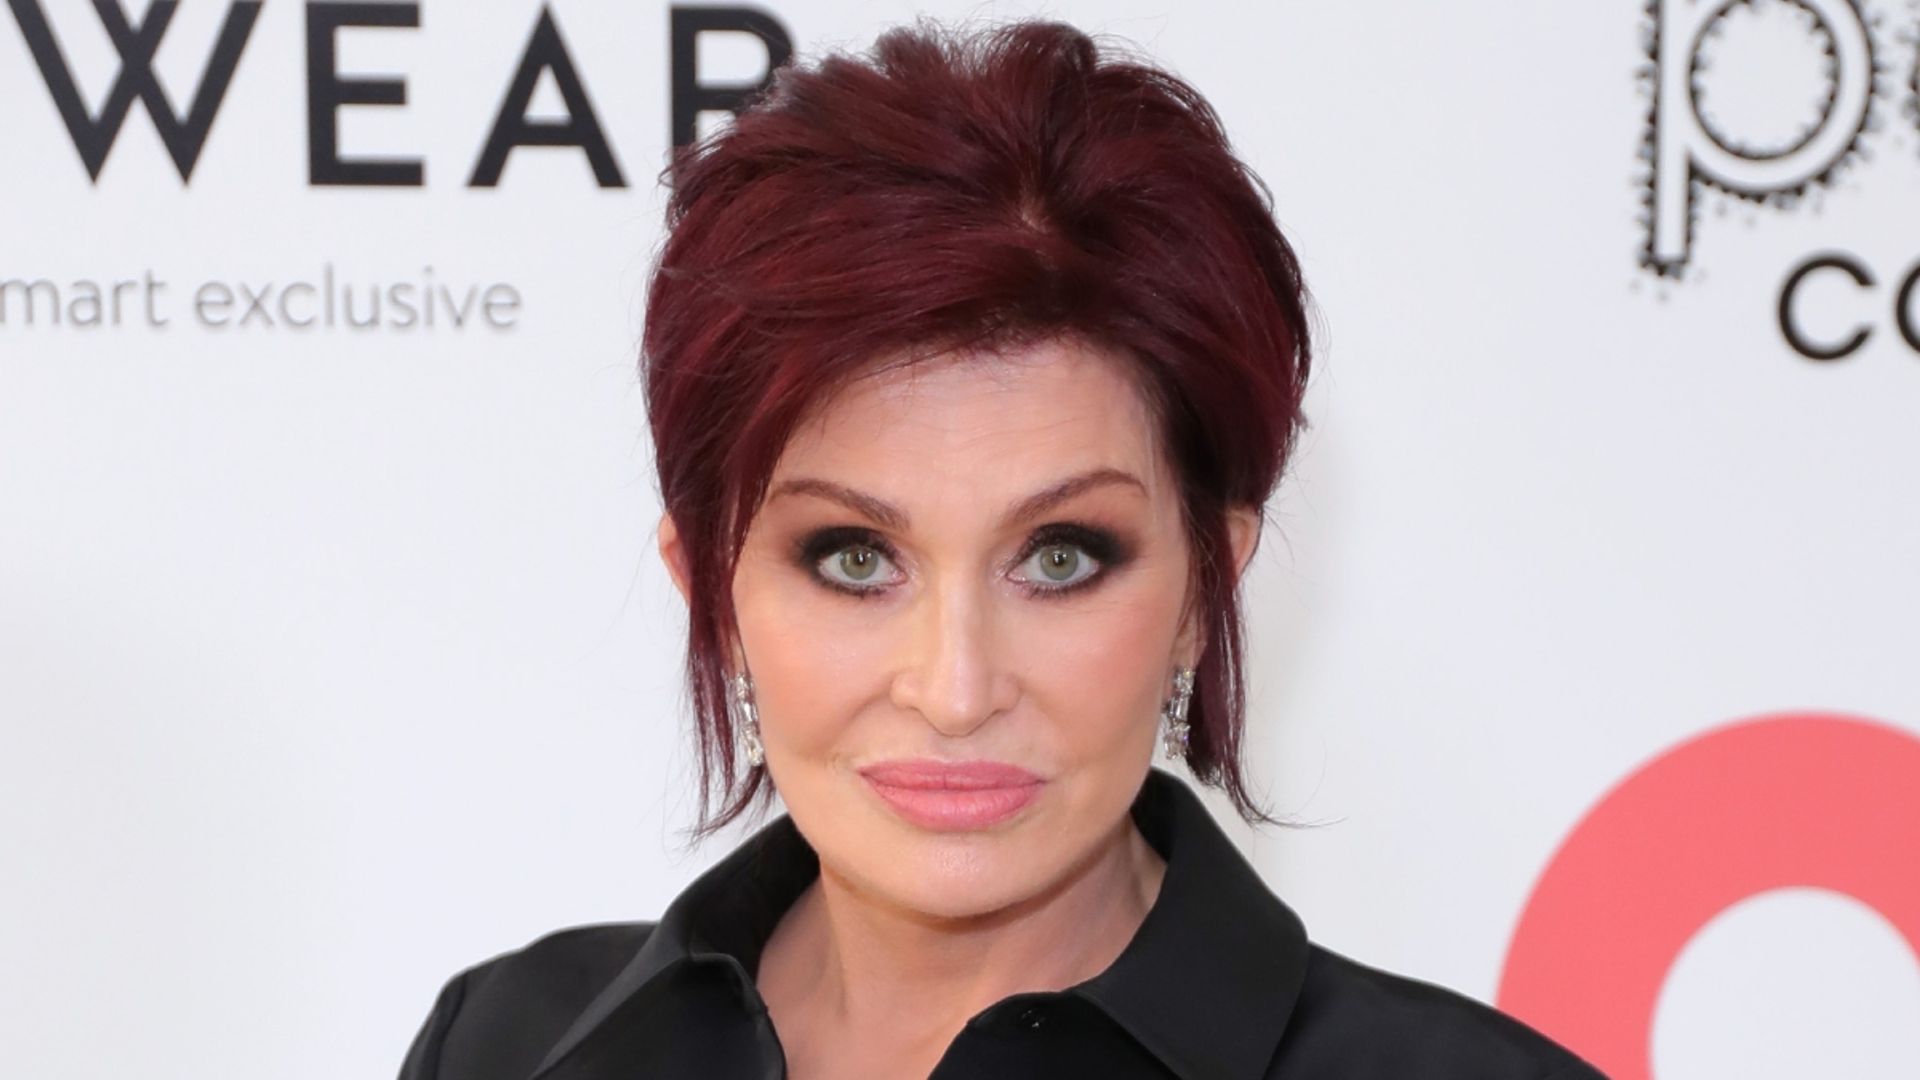 Sharon Osbourne's future on TV revealed after return to Ozzy and shock Covid diagnosis